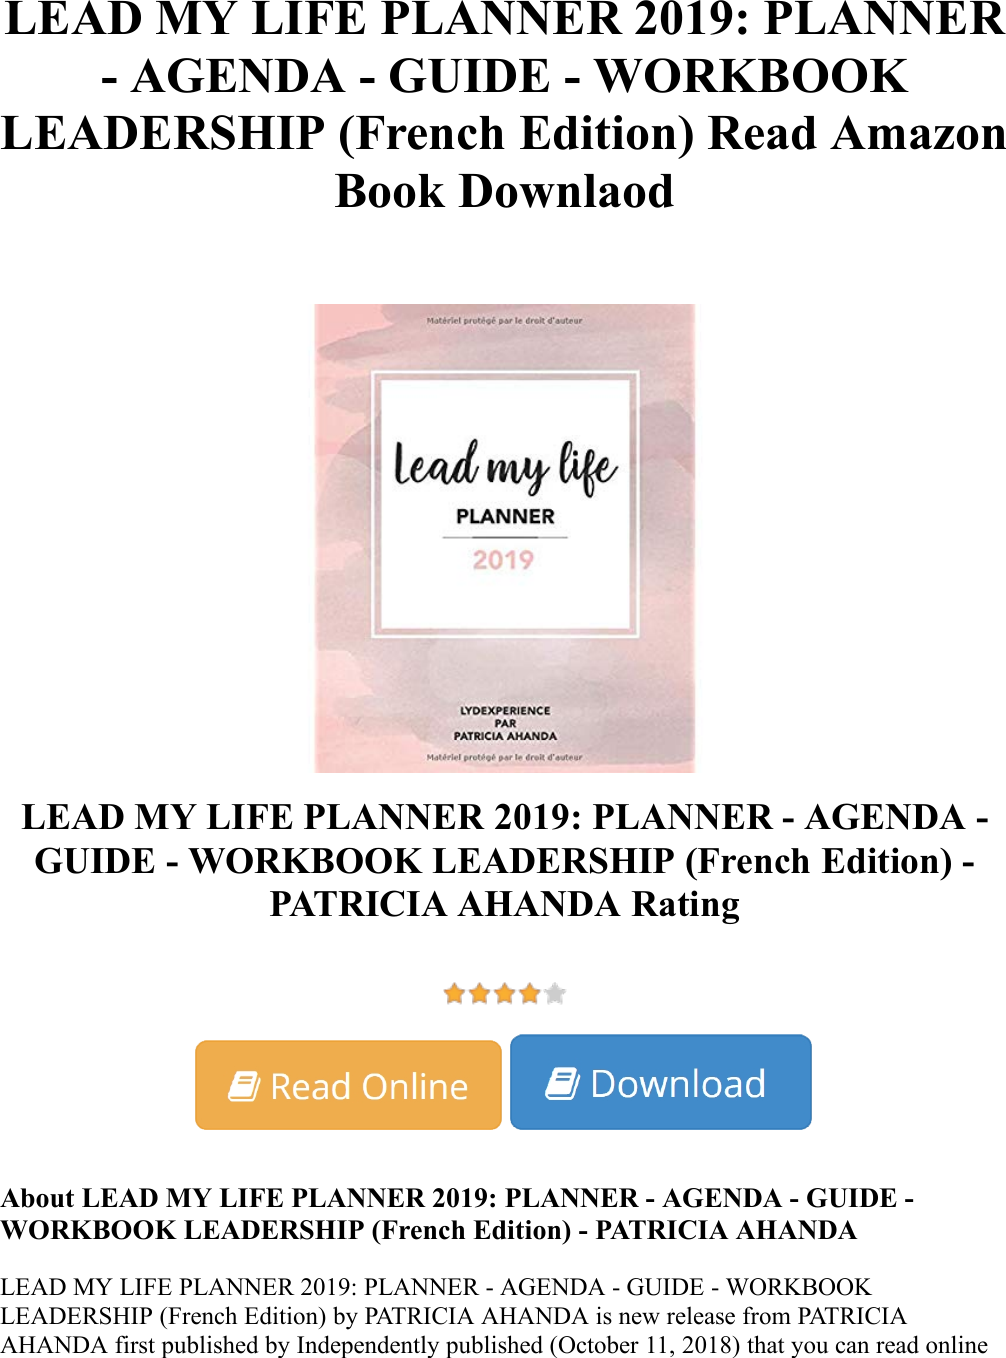 Page 1 of 2 - LEAD MY LIFE PLANNER 2019: - AGENDA GUIDE WORKBOOK LEADERSHIP (French Edition) PATRICIA AHANDA Read Amazon Book Do LEAD-MY-LIFE-PLANNER-2019-PLANNER---AGENDA---GUIDE---WORKBOOK-LEADERSHIP-French-Edition